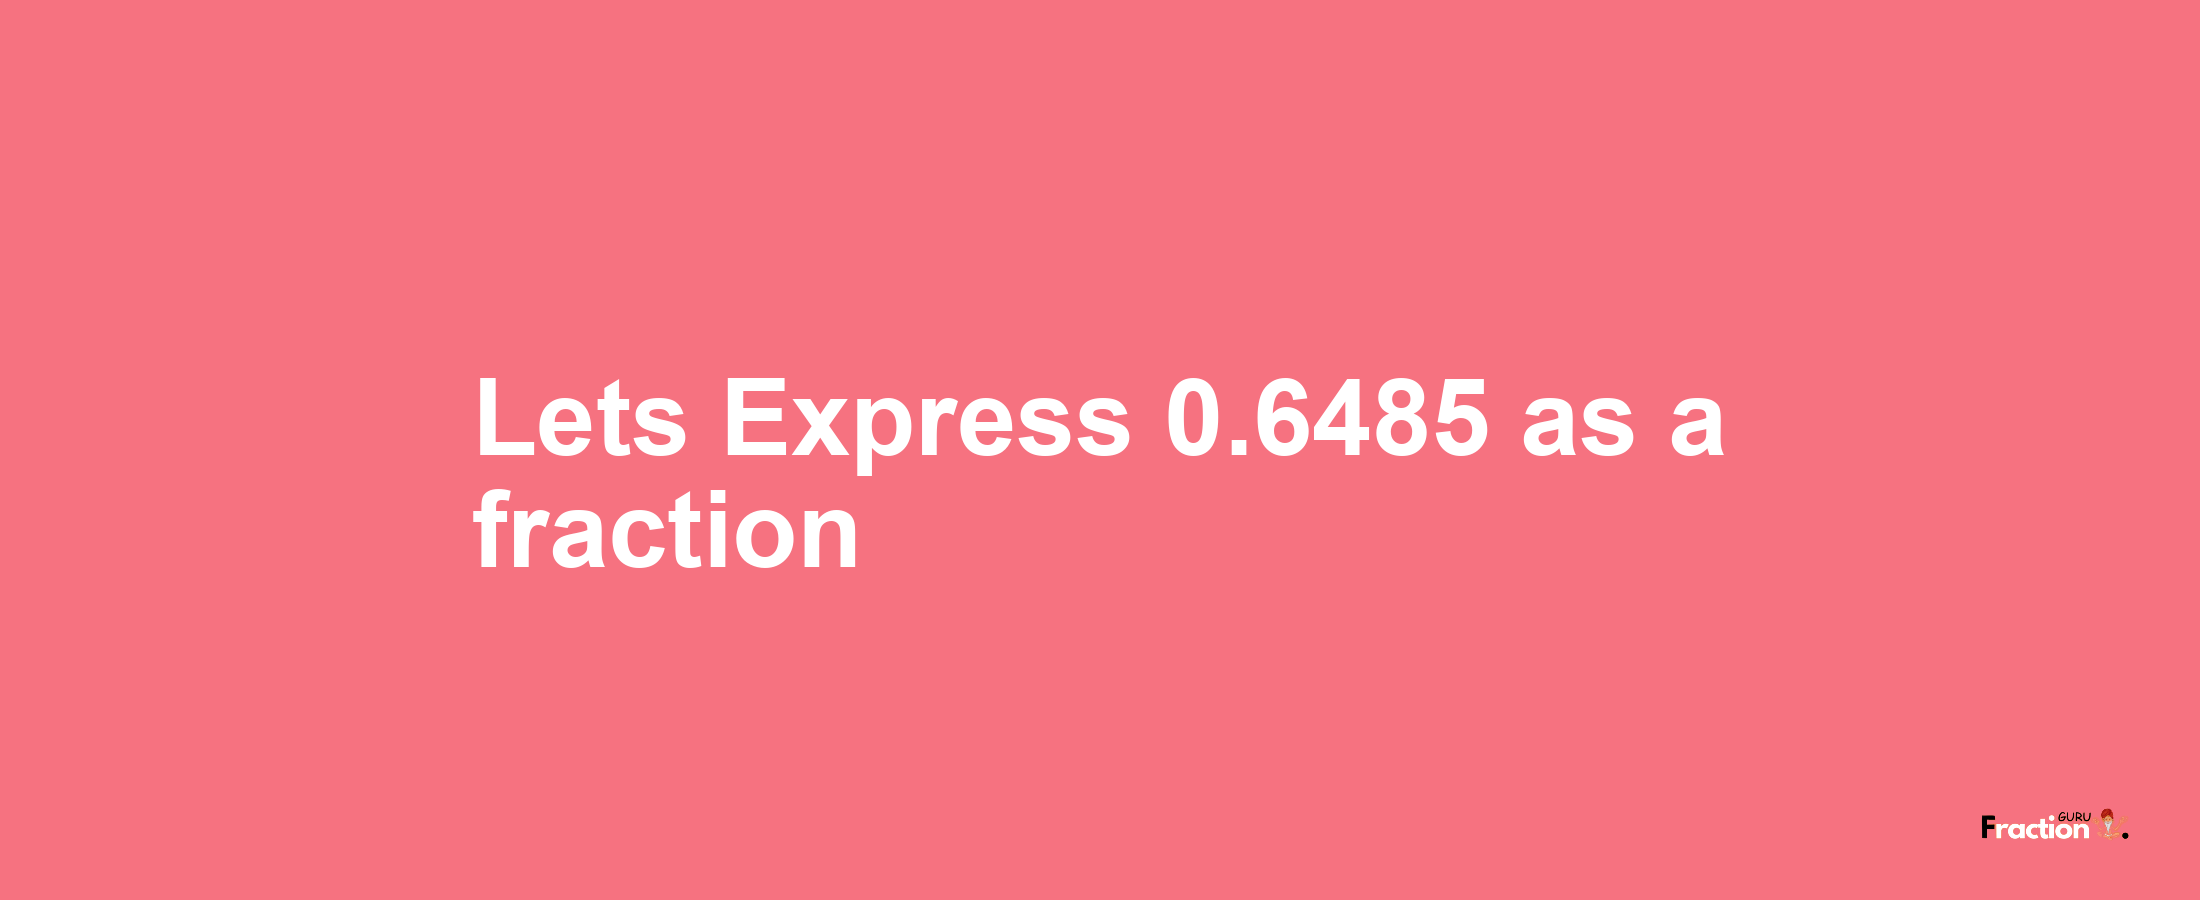 Lets Express 0.6485 as afraction